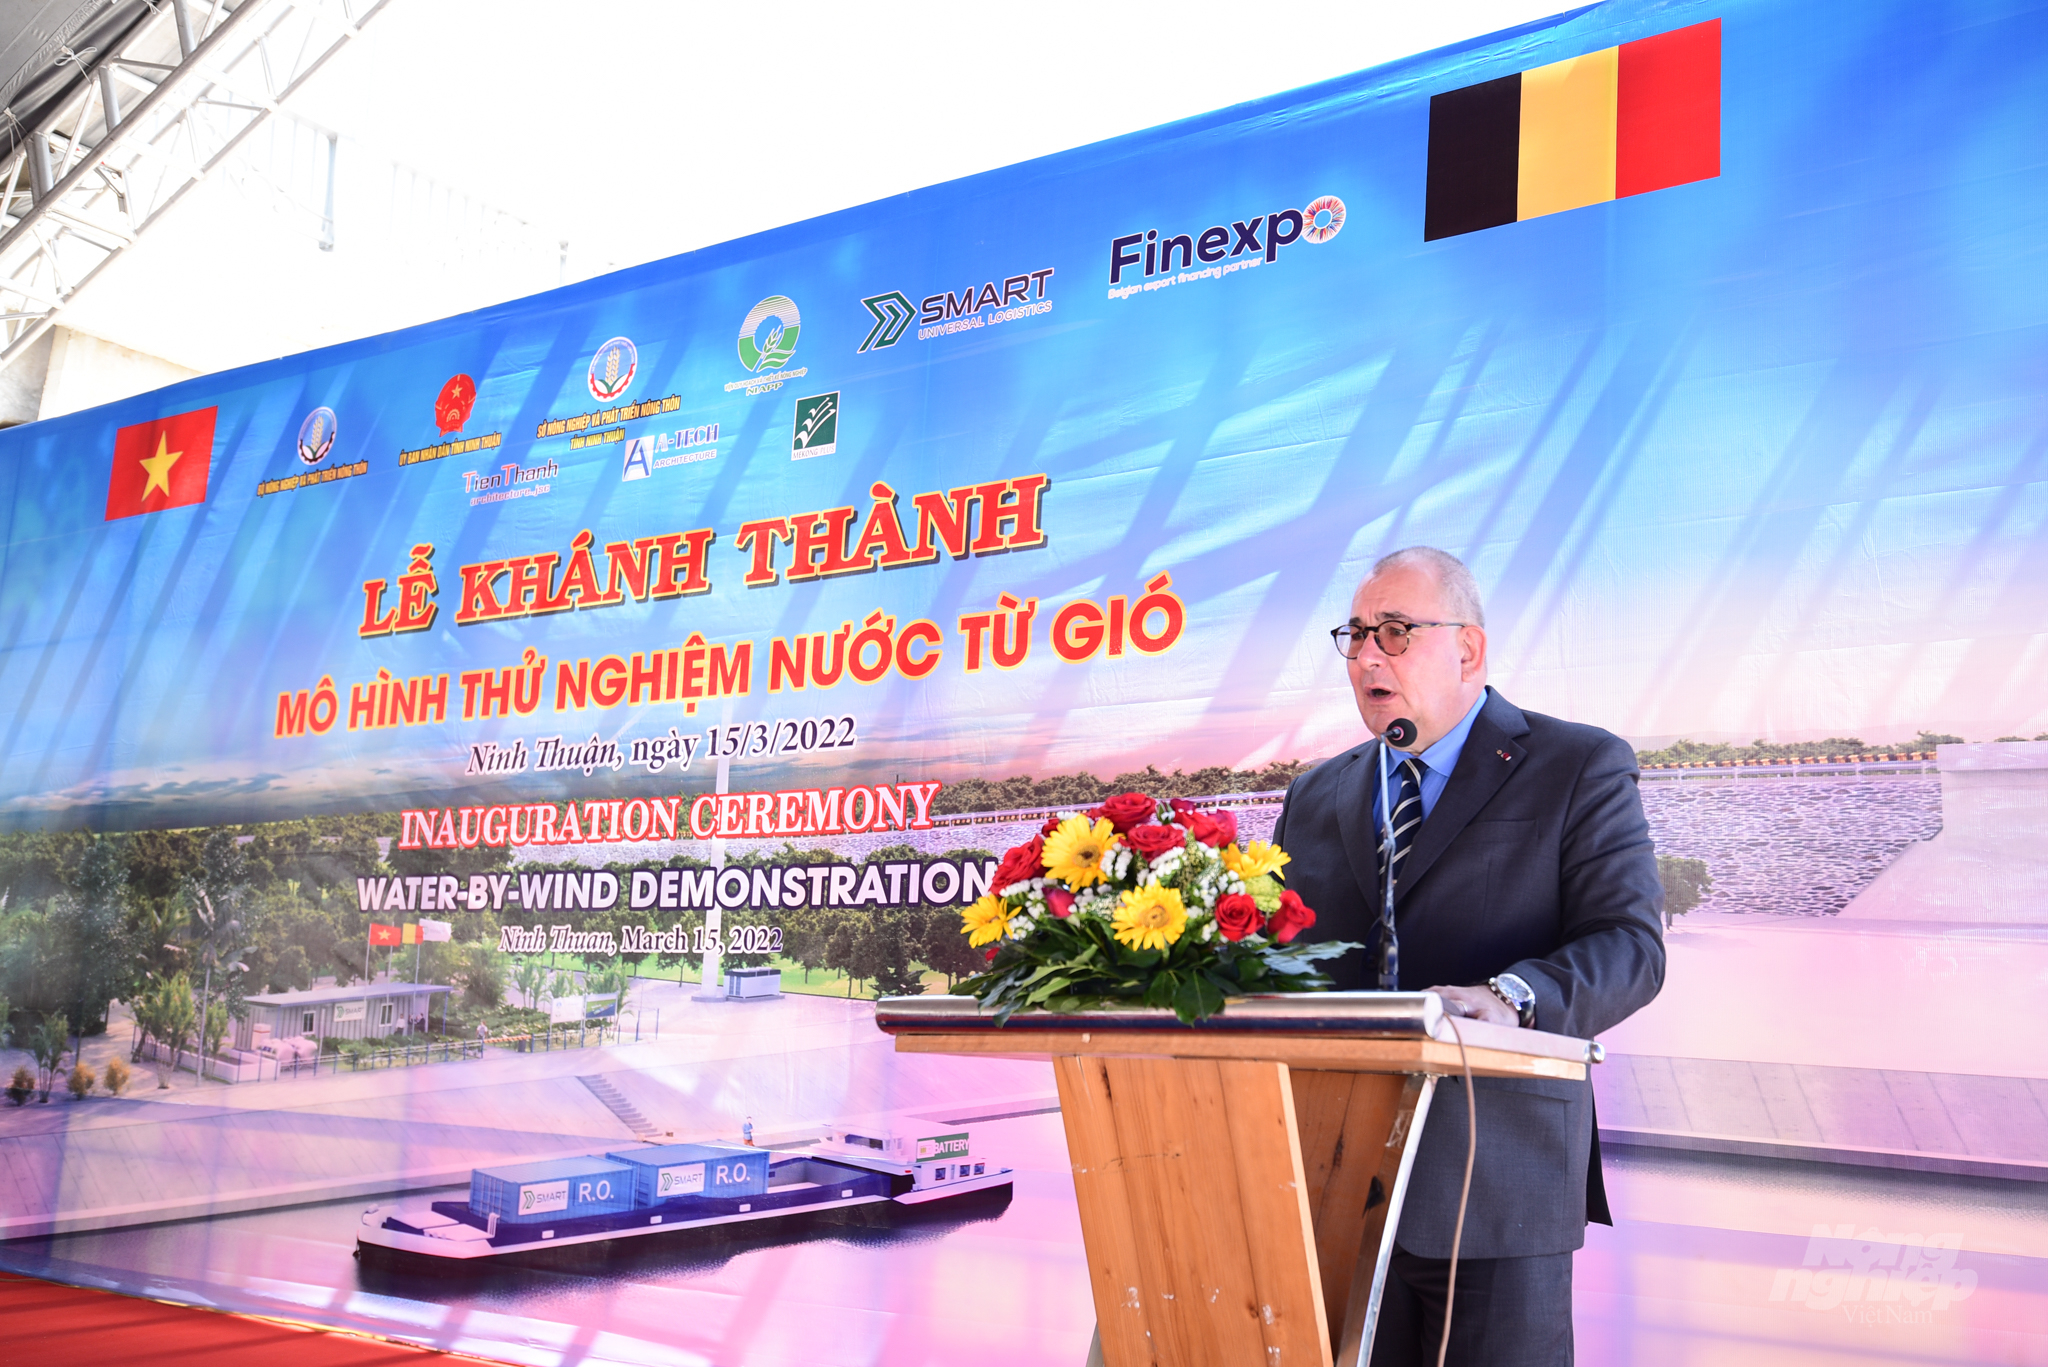 Belgian Ambassador to Vietnam Paul Jansen said that a series of projects related to climate change adaptation funded by the Belgian Government in Vietnam will be implemented in the near future. Photo: Tung Dinh.